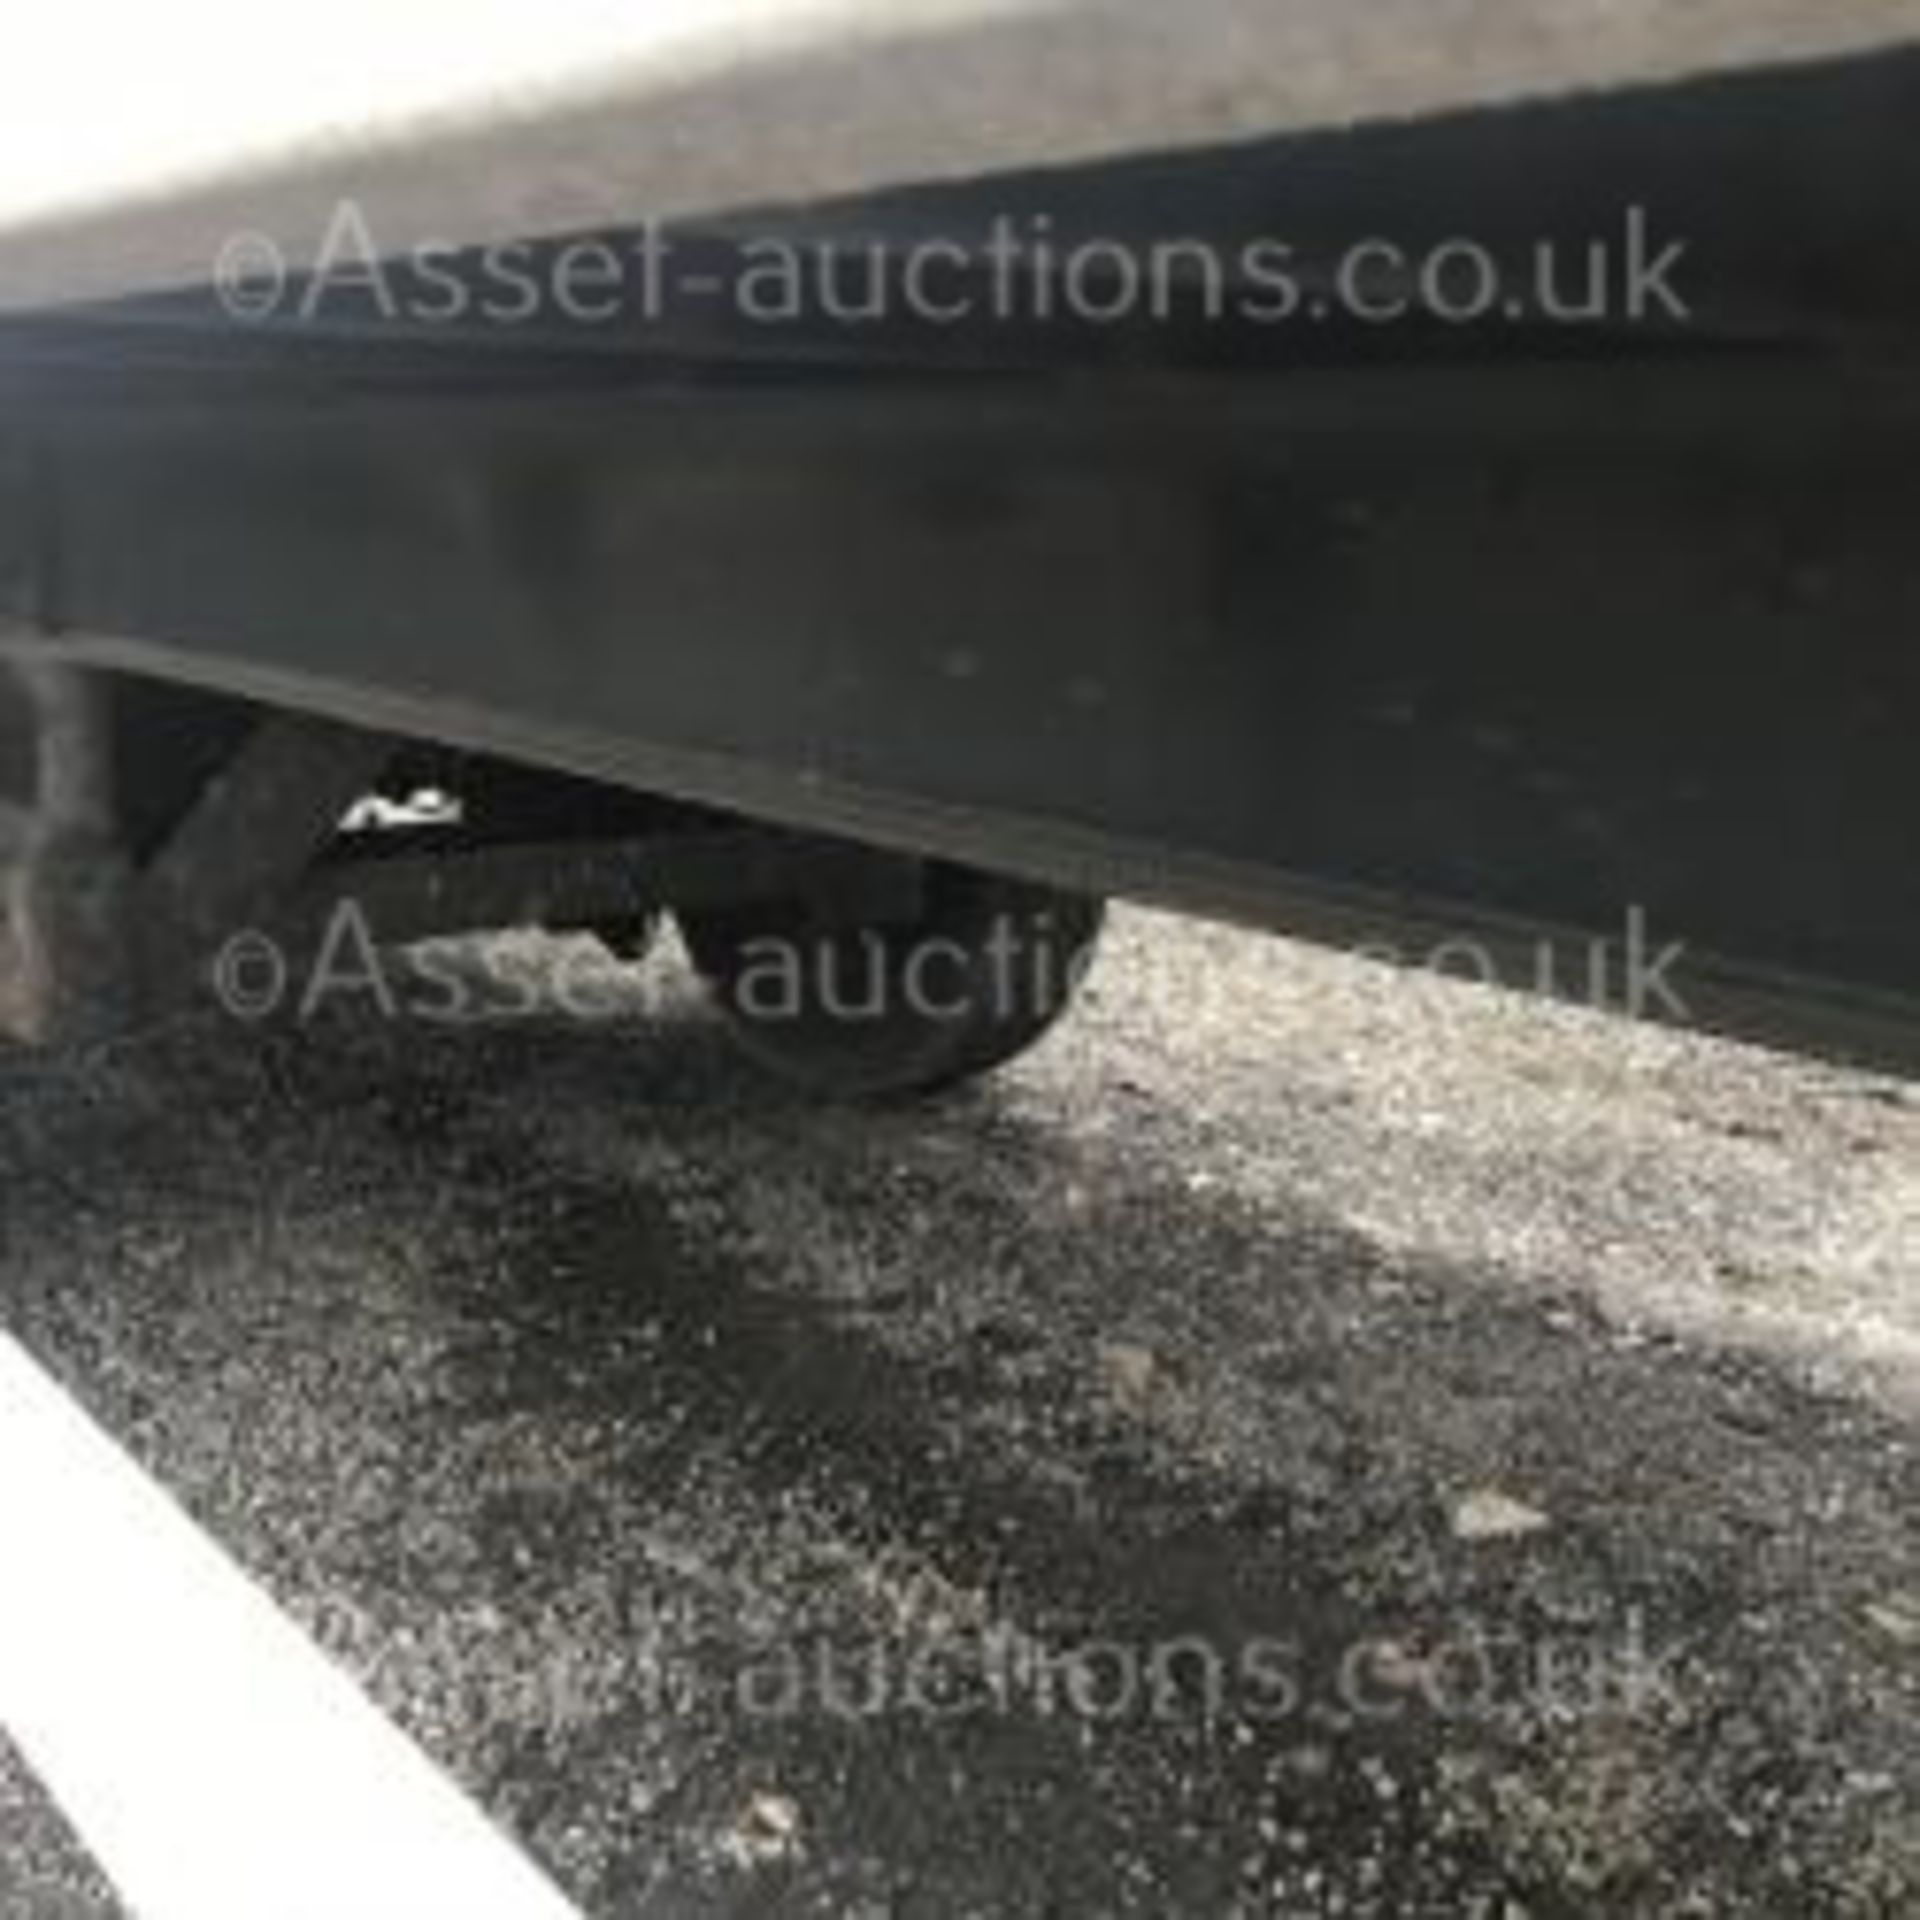 2007 DONBUR SINGLE AXLE TRAILER WITH TAIL LIFT, GOOD CONDITION *PLUS VAT* - Image 21 of 22